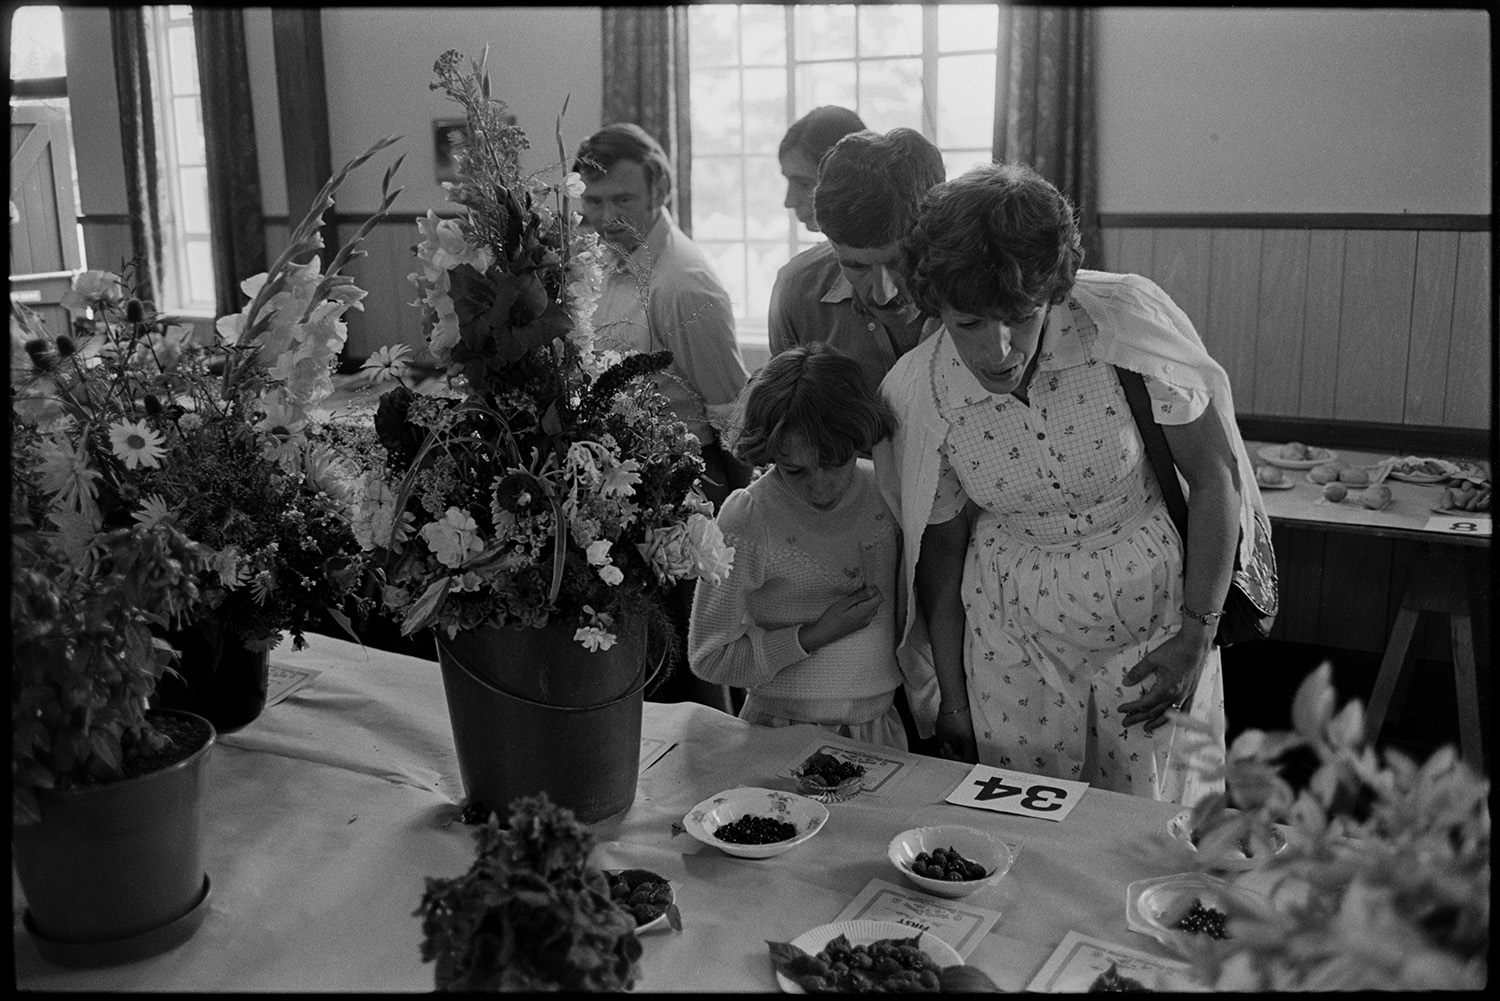 Flower show exhibits, jams, cups, sports, hot dog stall, bicycles, Clay Pigeon Shoot.
[A family at Dolton Flower Show looking at a table with a display of fruit and flower exhibits in Dolton Village Hall.]